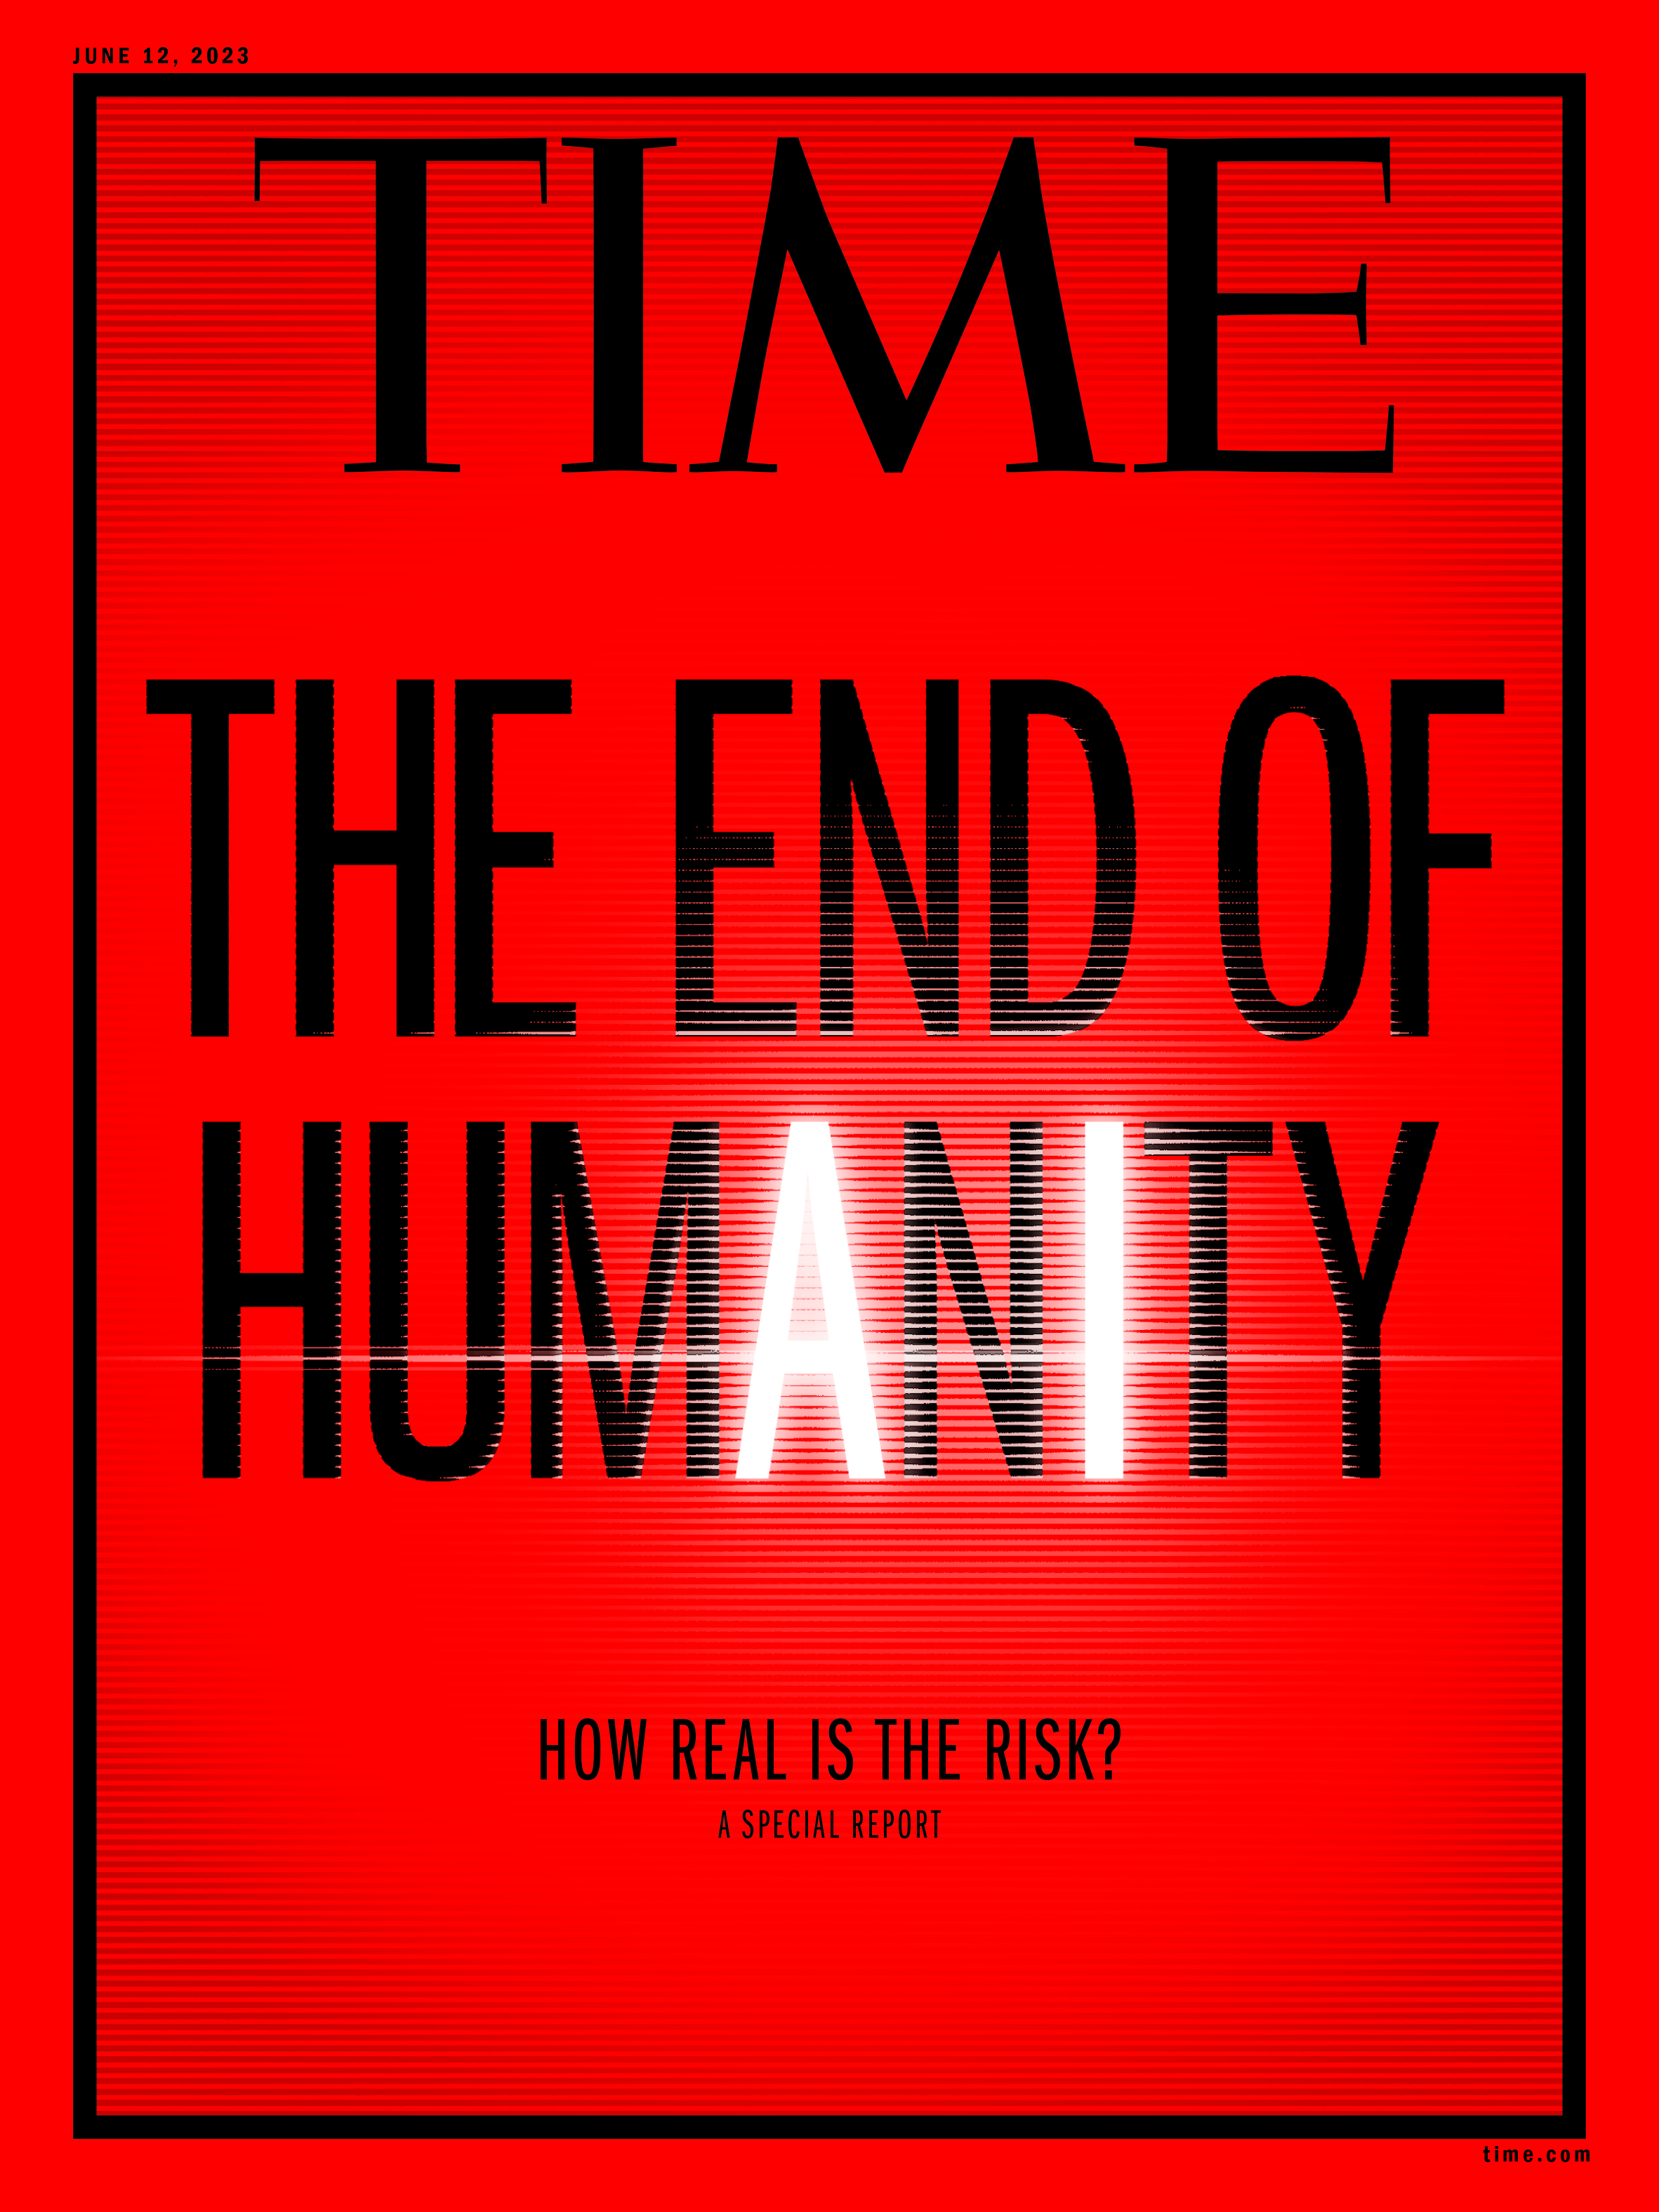 TIME - "The End of Humanity," June 12, 2023